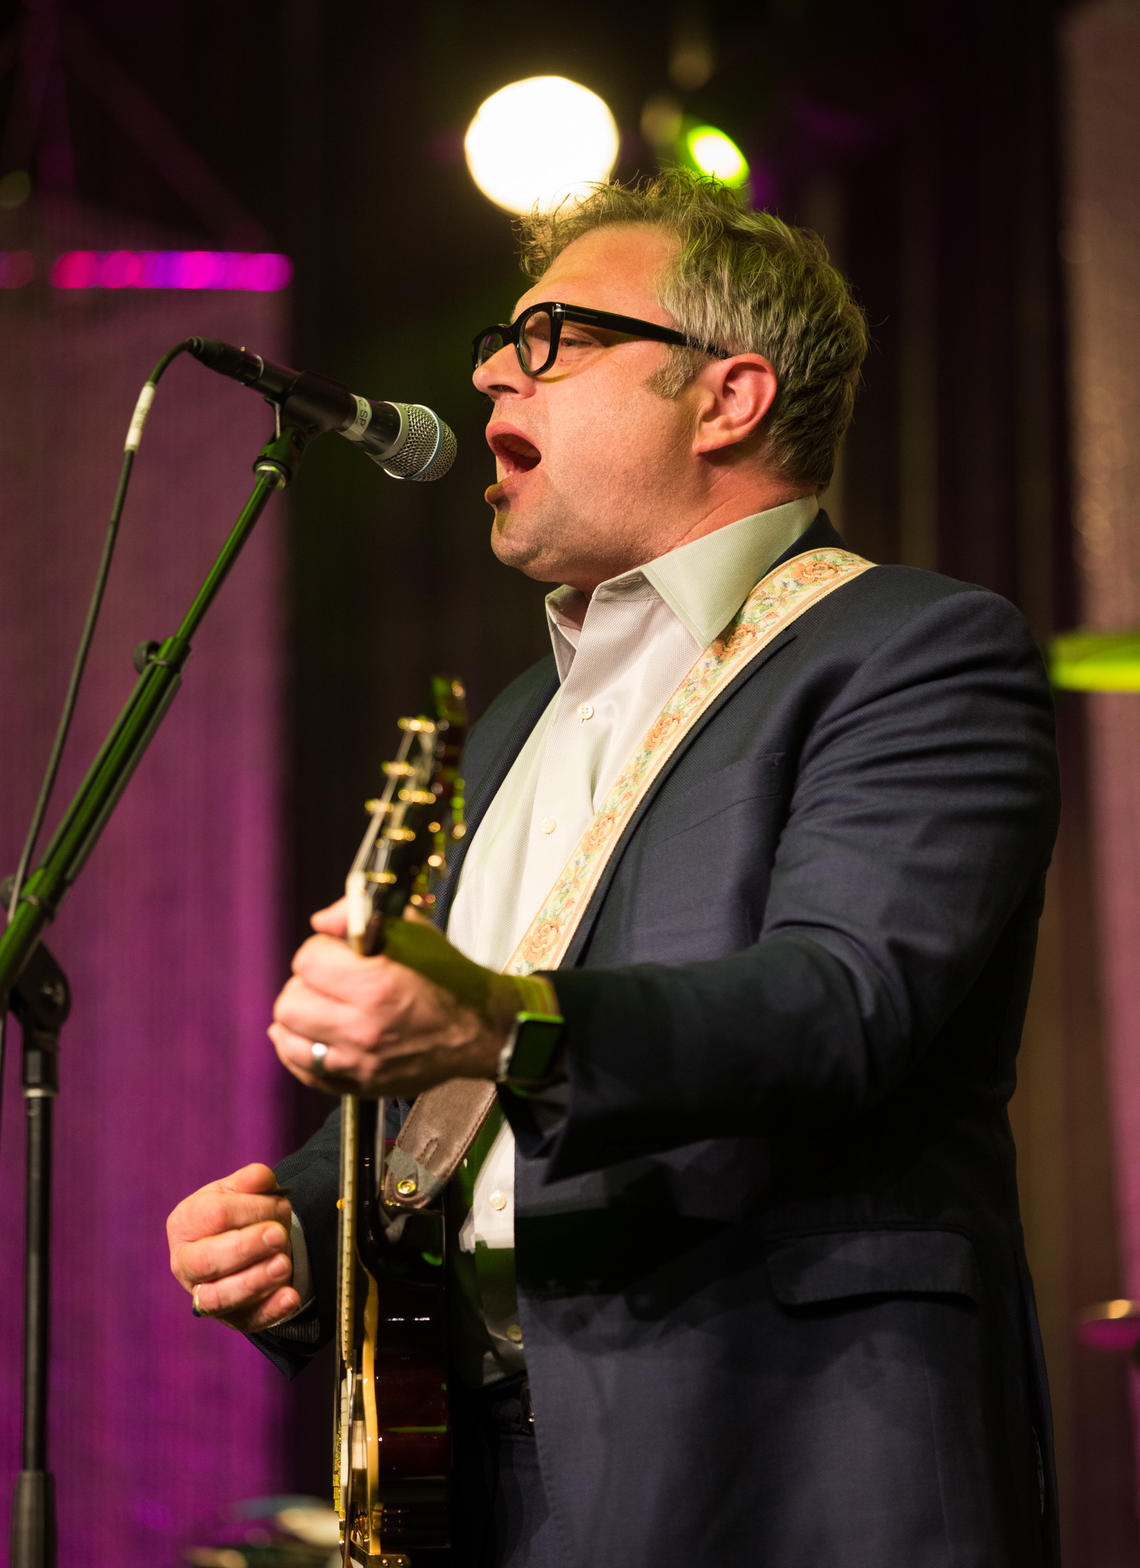 Steven Page performs at the fifth annual The Beat Goes On Gala, held at the Palomino Room at Calgary’s Stampede Park on Sept. 8, which raised $900,000 for cardiovascular research in southern Alberta.